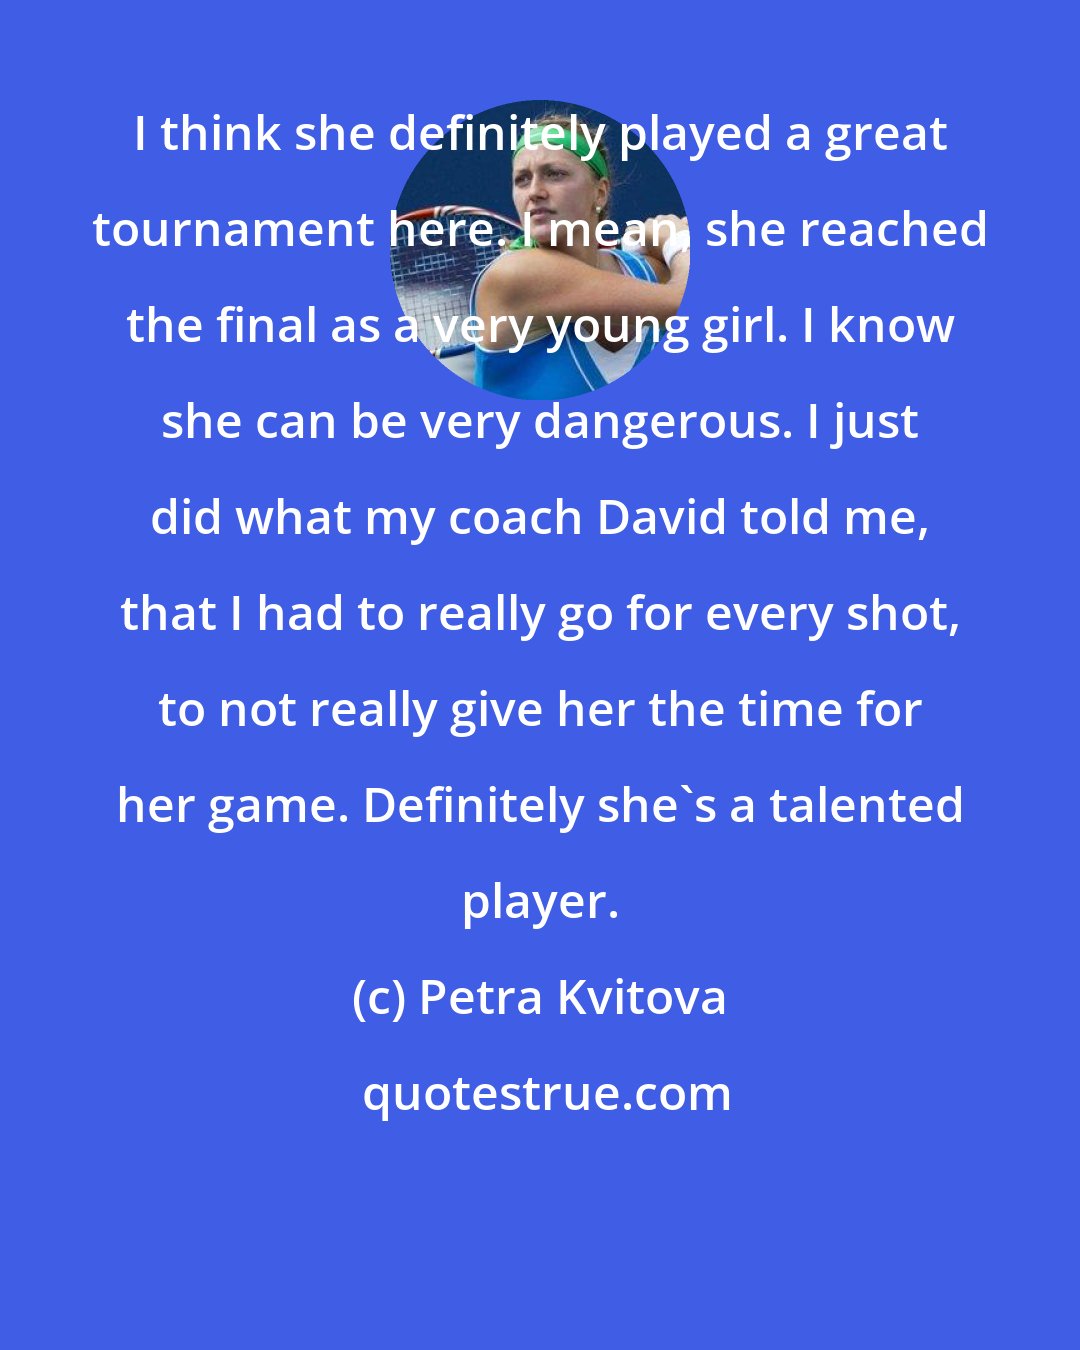 Petra Kvitova: I think she definitely played a great tournament here. I mean, she reached the final as a very young girl. I know she can be very dangerous. I just did what my coach David told me, that I had to really go for every shot, to not really give her the time for her game. Definitely she's a talented player.